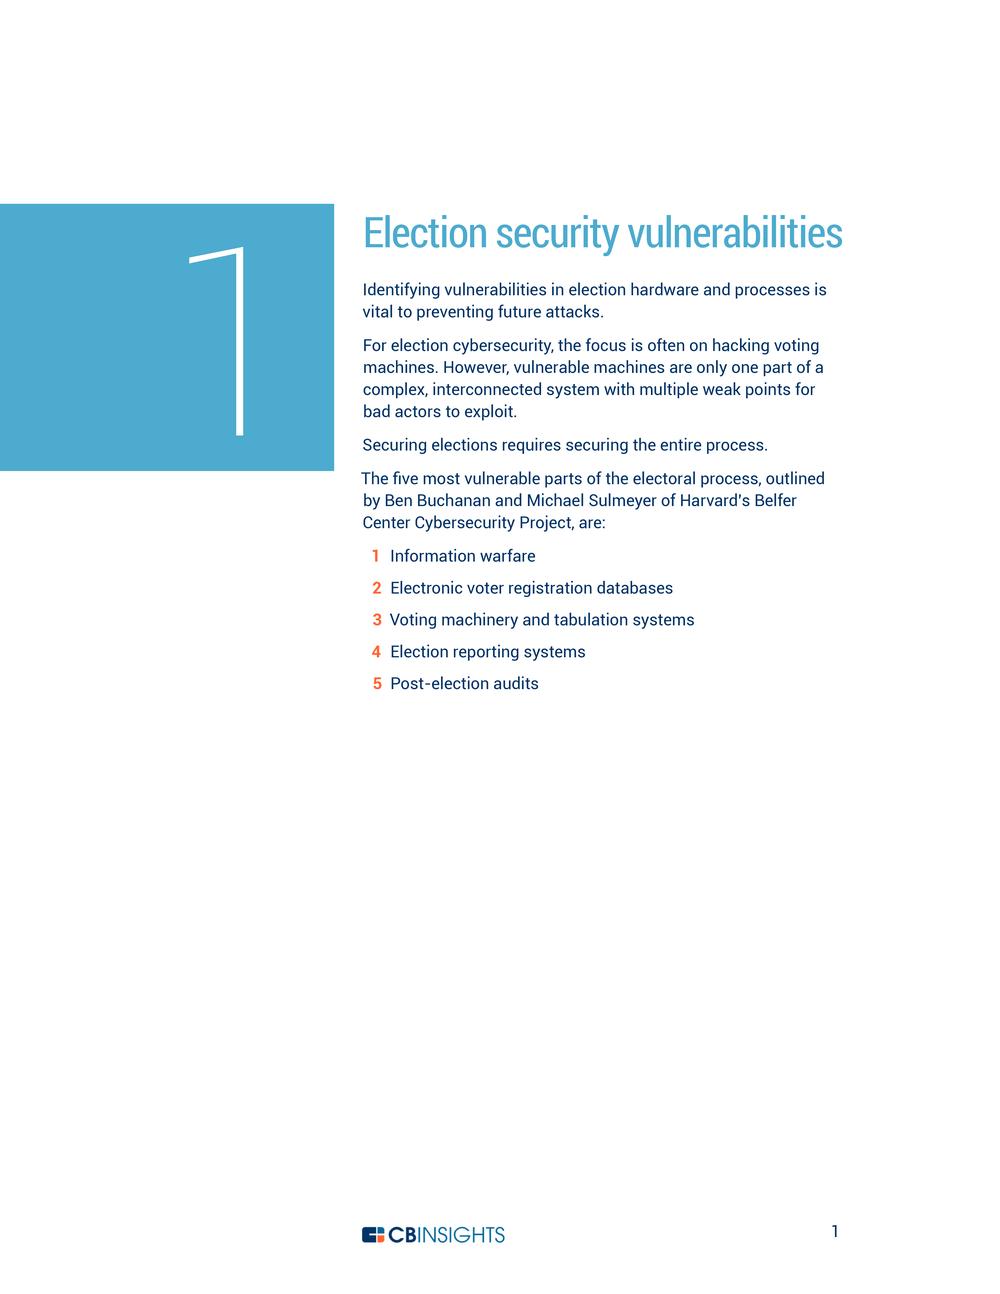 how blockchains could secure elections.pdf